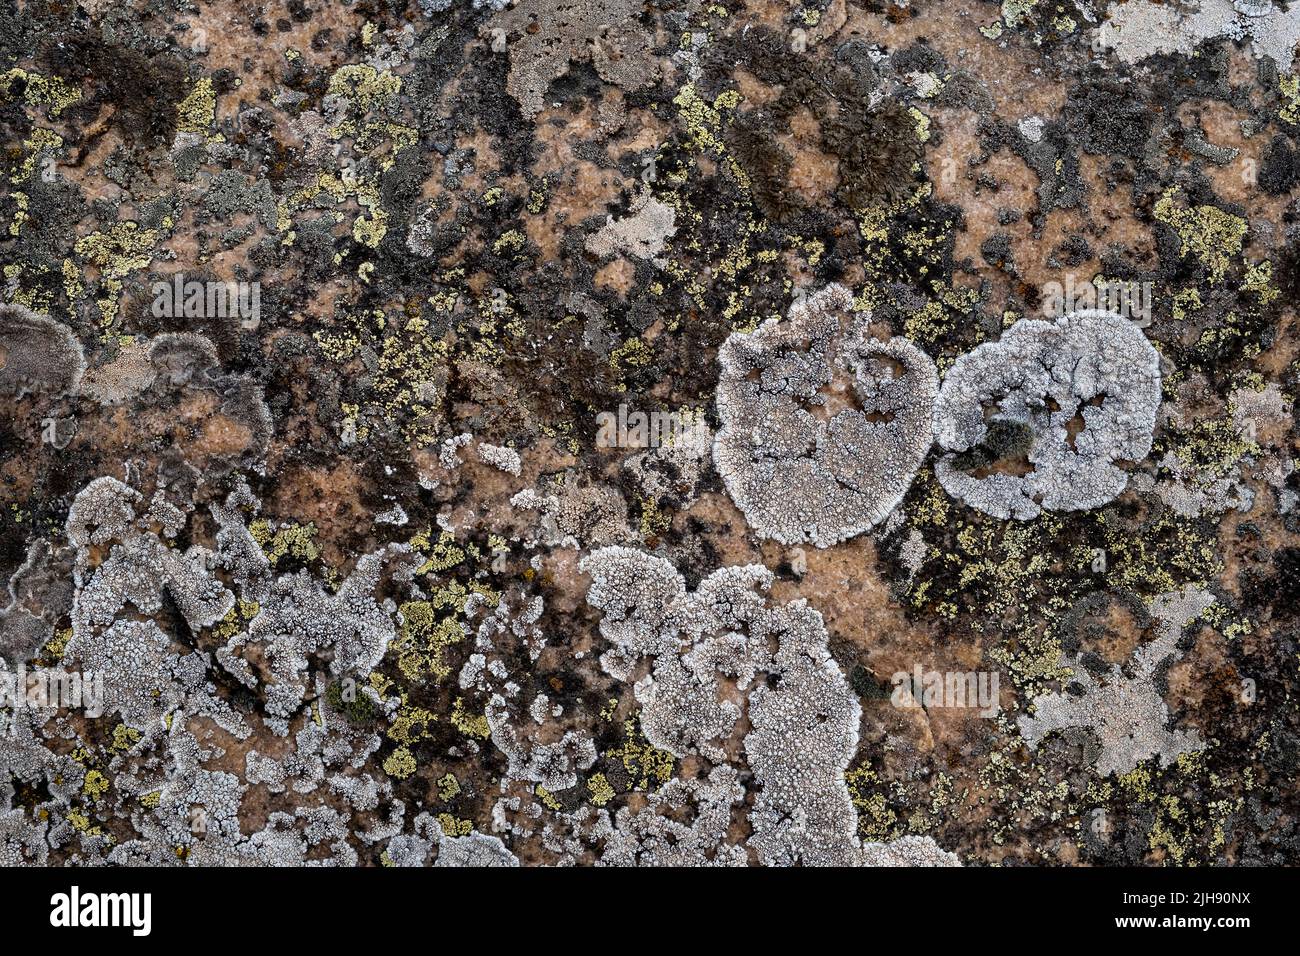 Different lichens growing on limestone Stock Photo